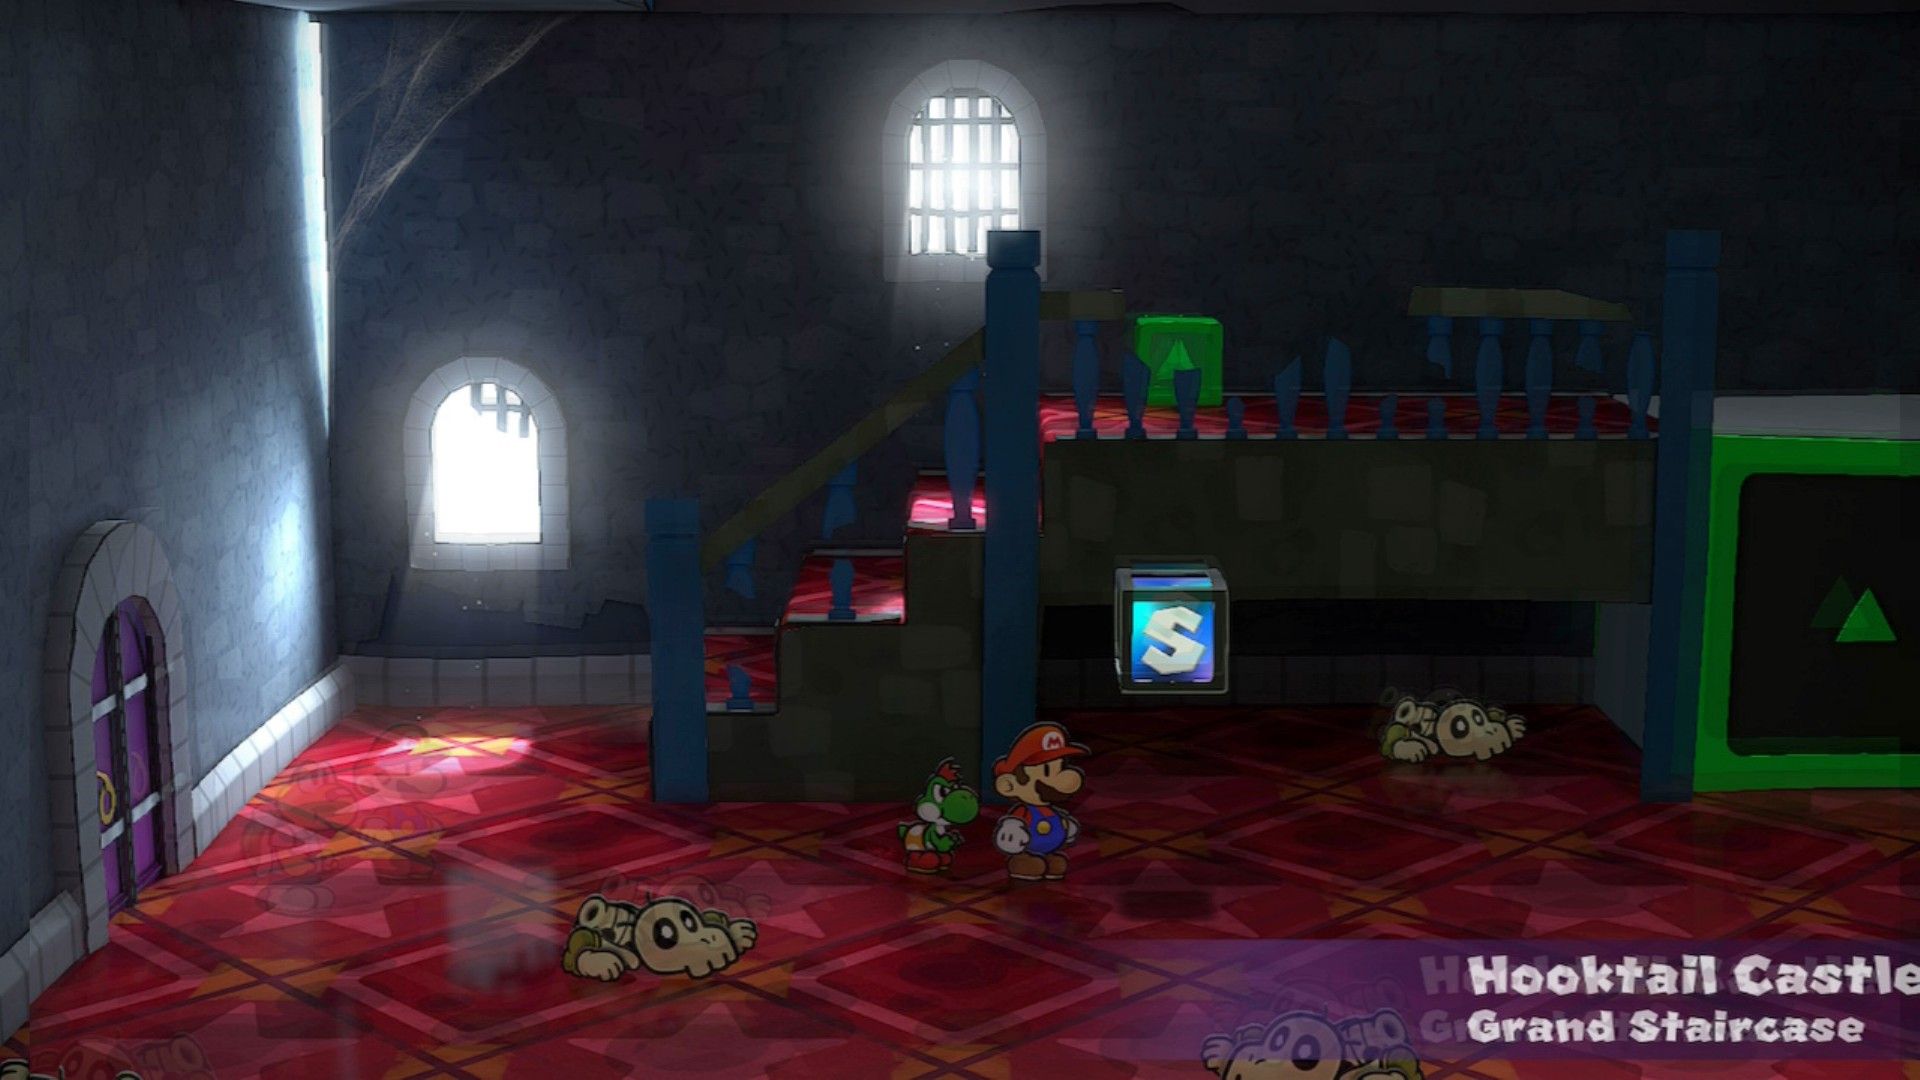 Paper Mario: The Thousand-Year Door - Grand Staircase in Hooktail Castle